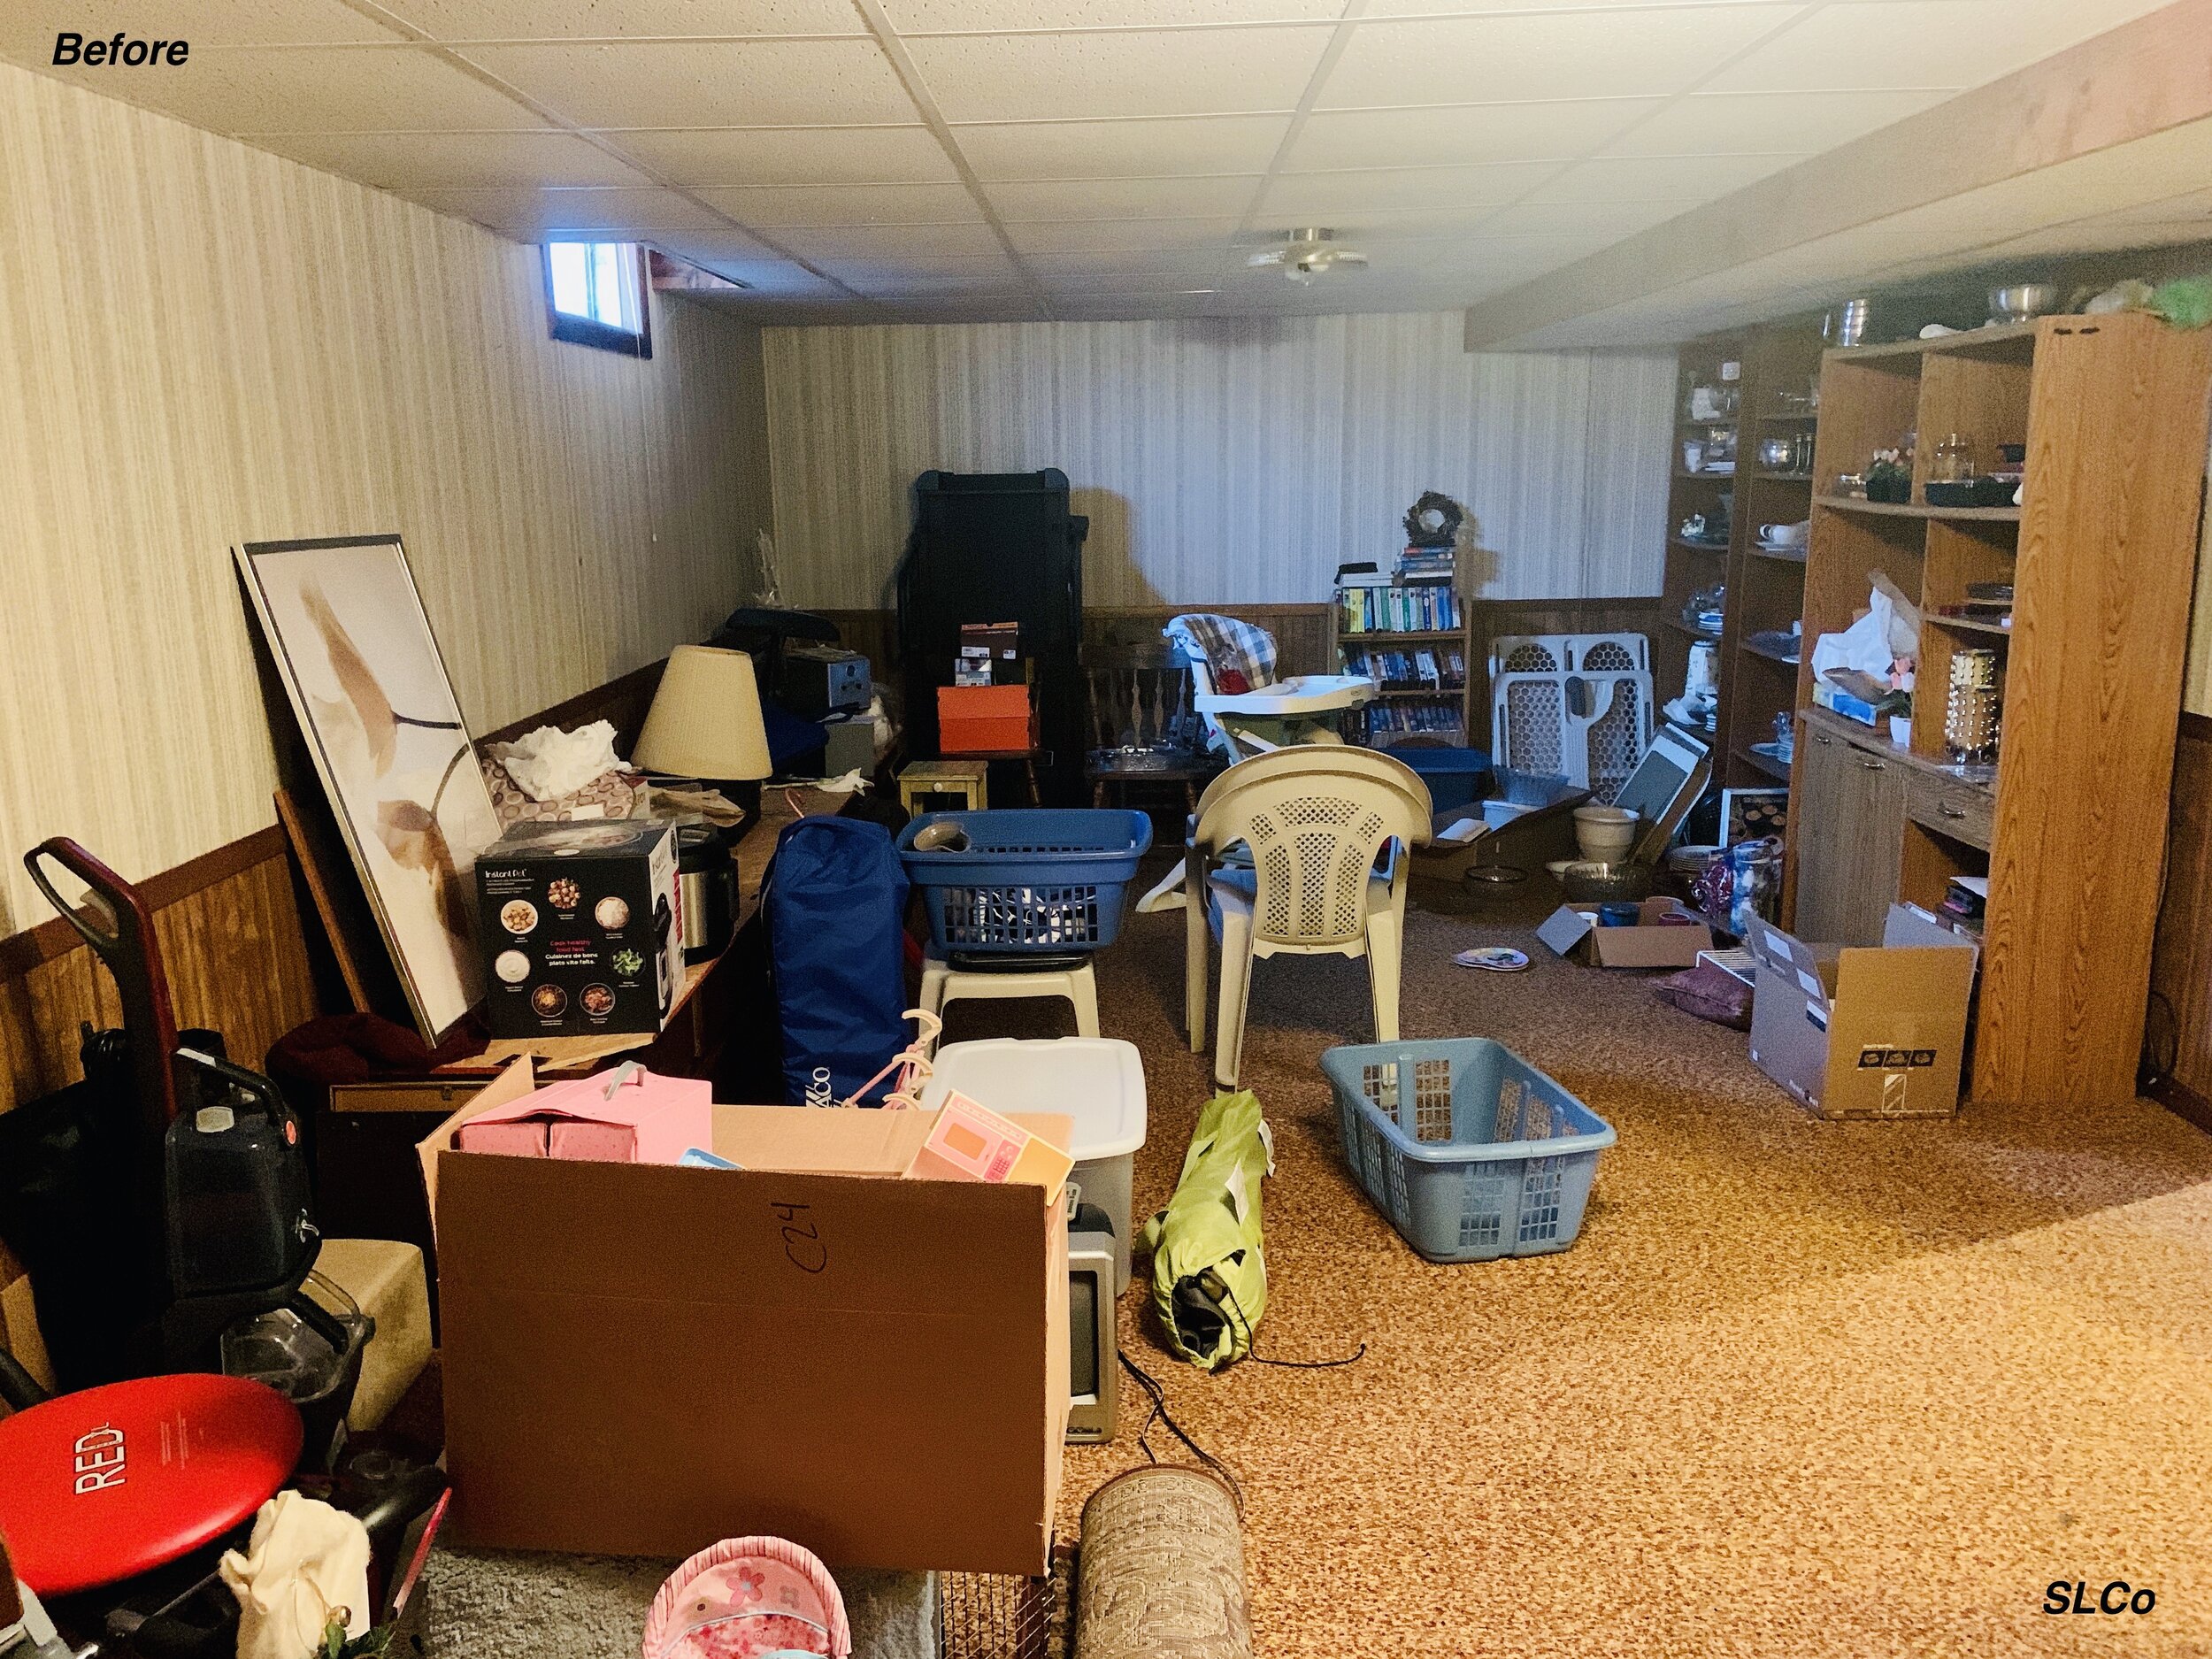 Before photo of basement with items and toys on floor and in stacks.